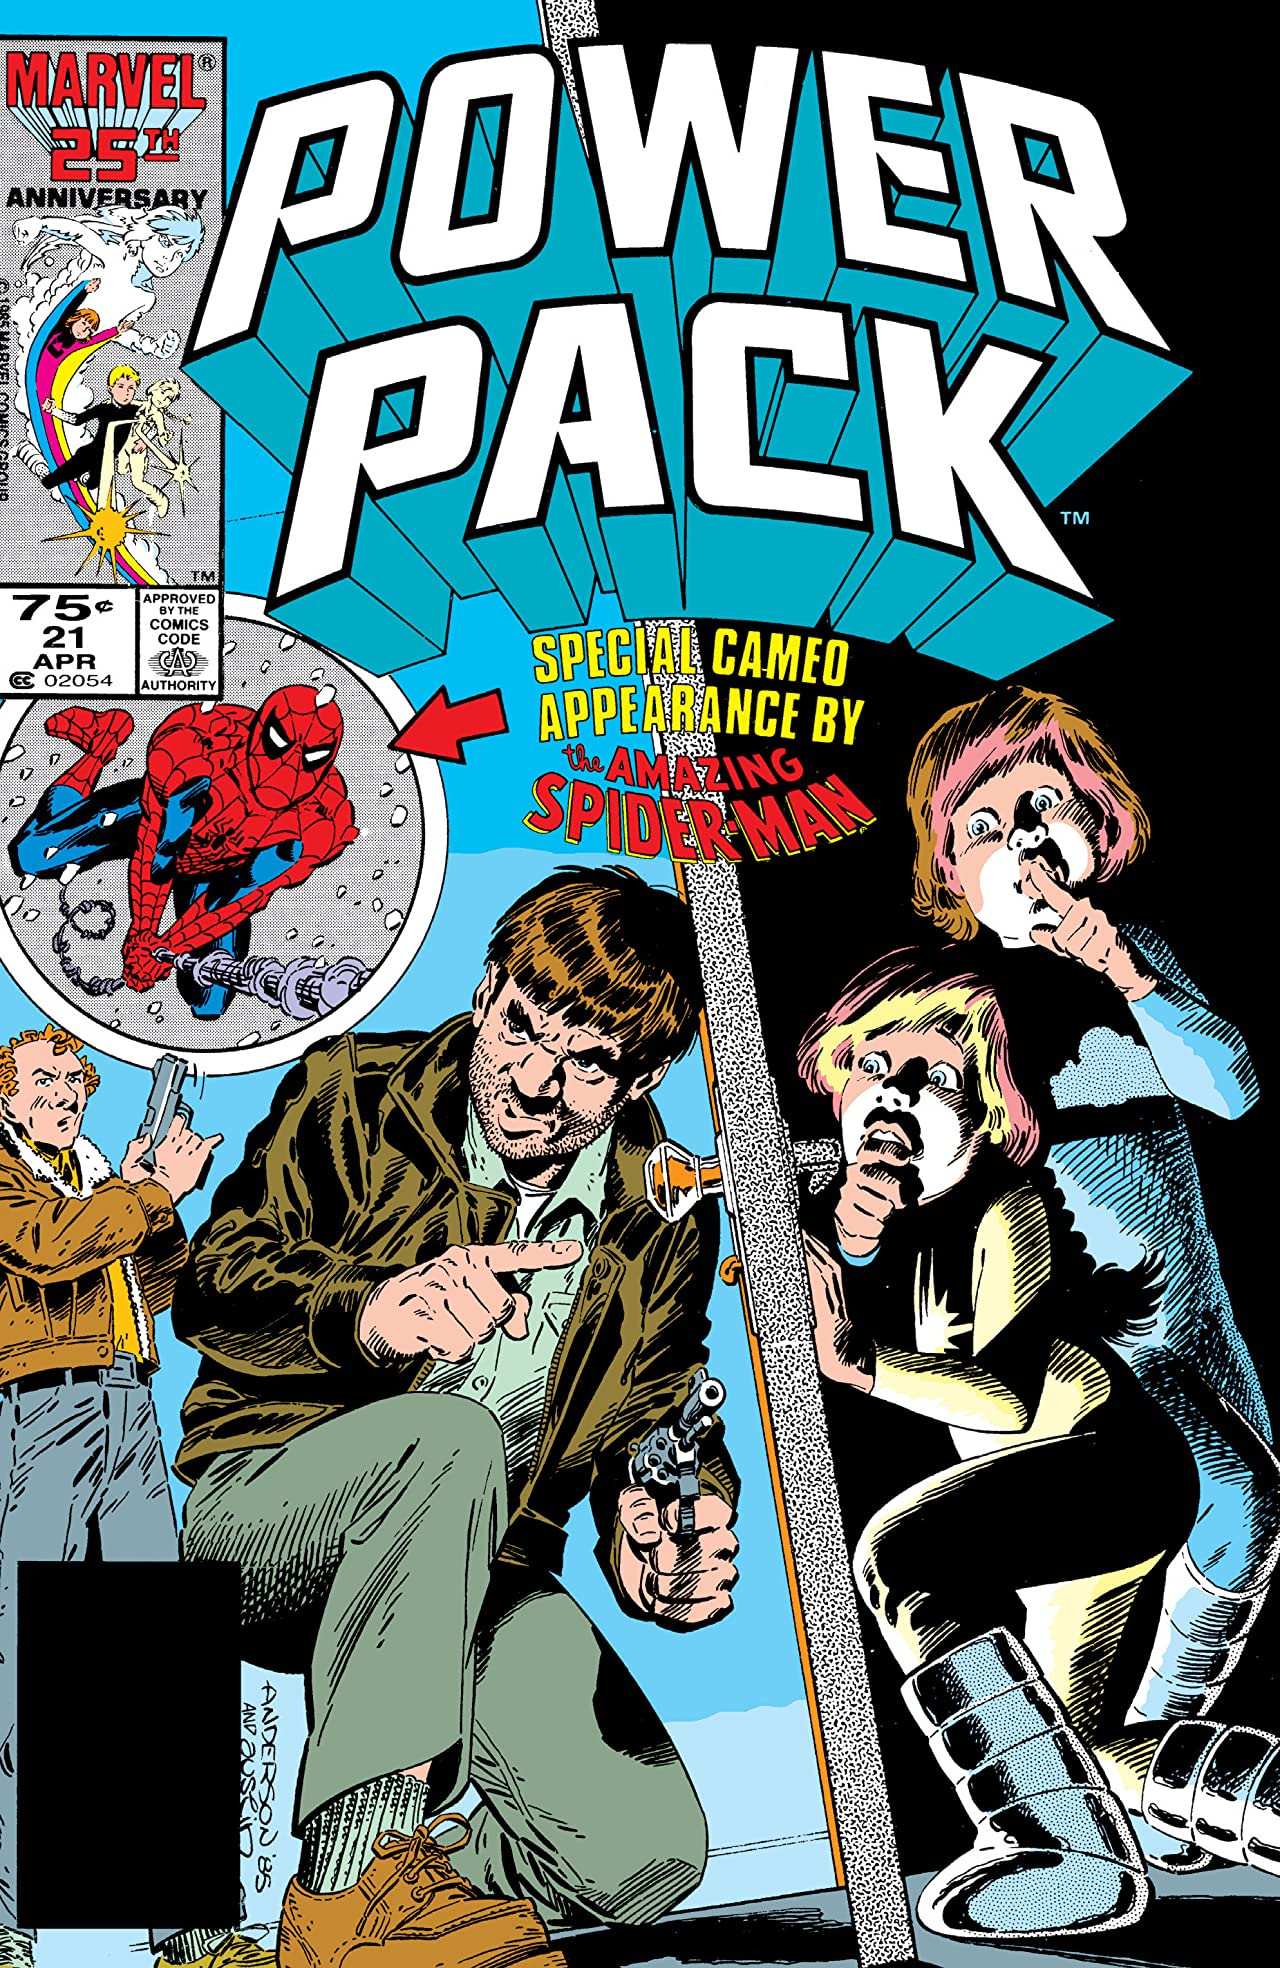 Power Pack Vol 1 21 Marvel Database Fandom Powered By Wikia 